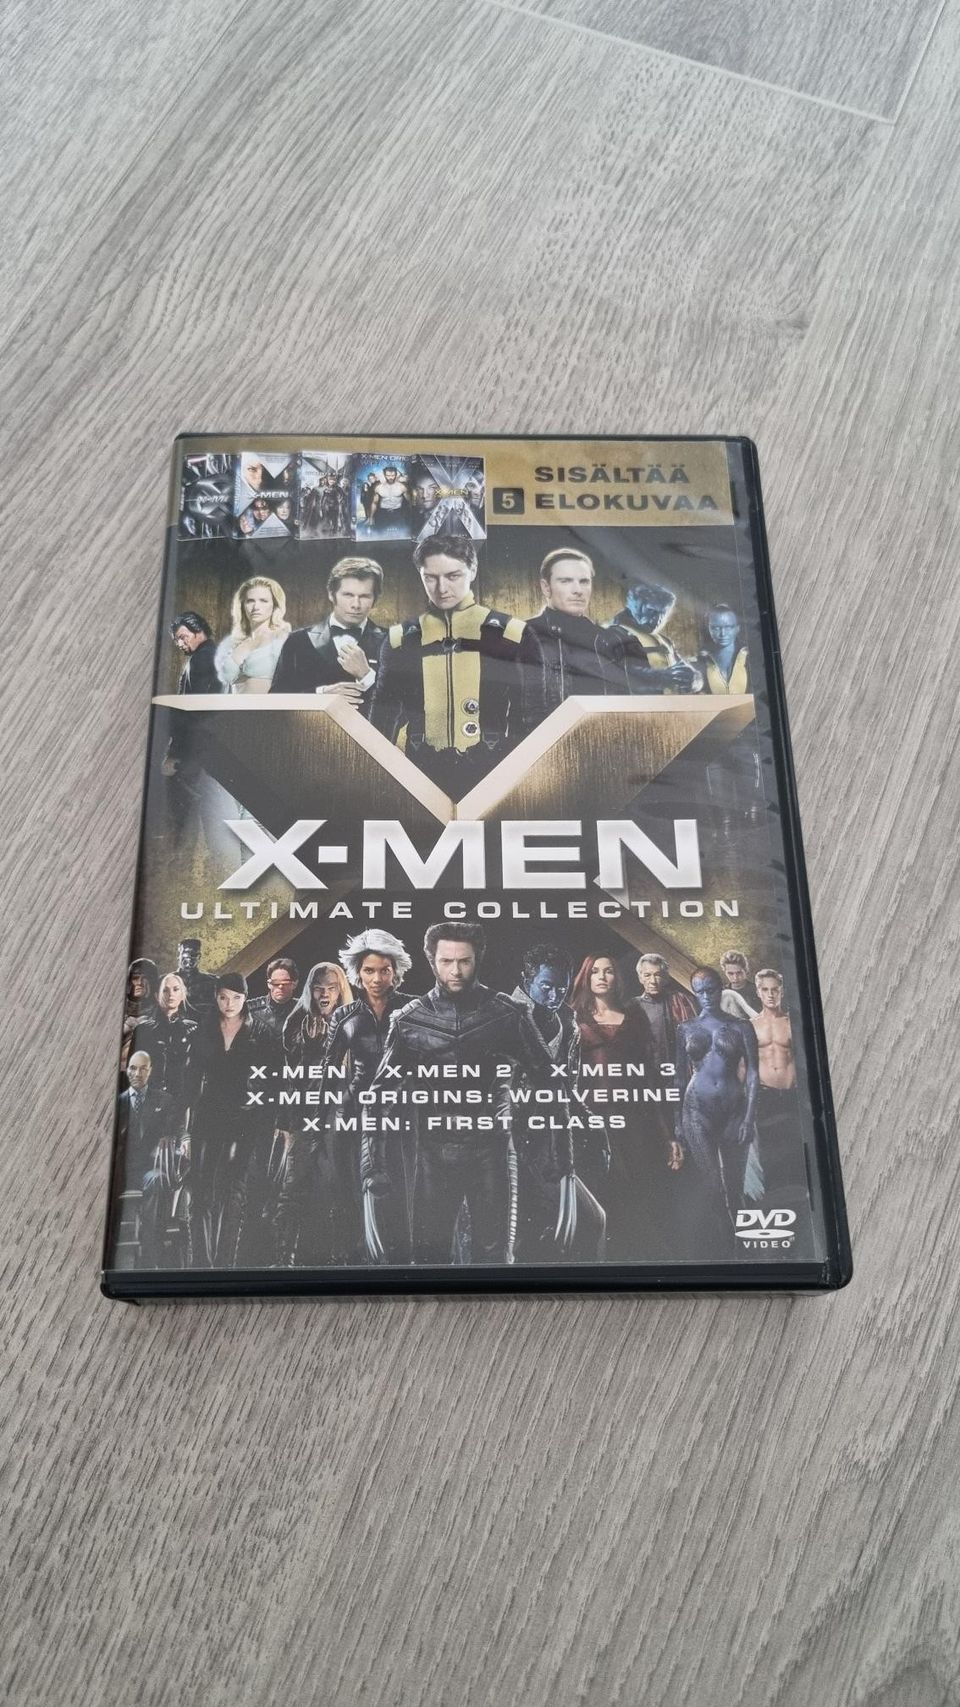 X-men ultimate collection